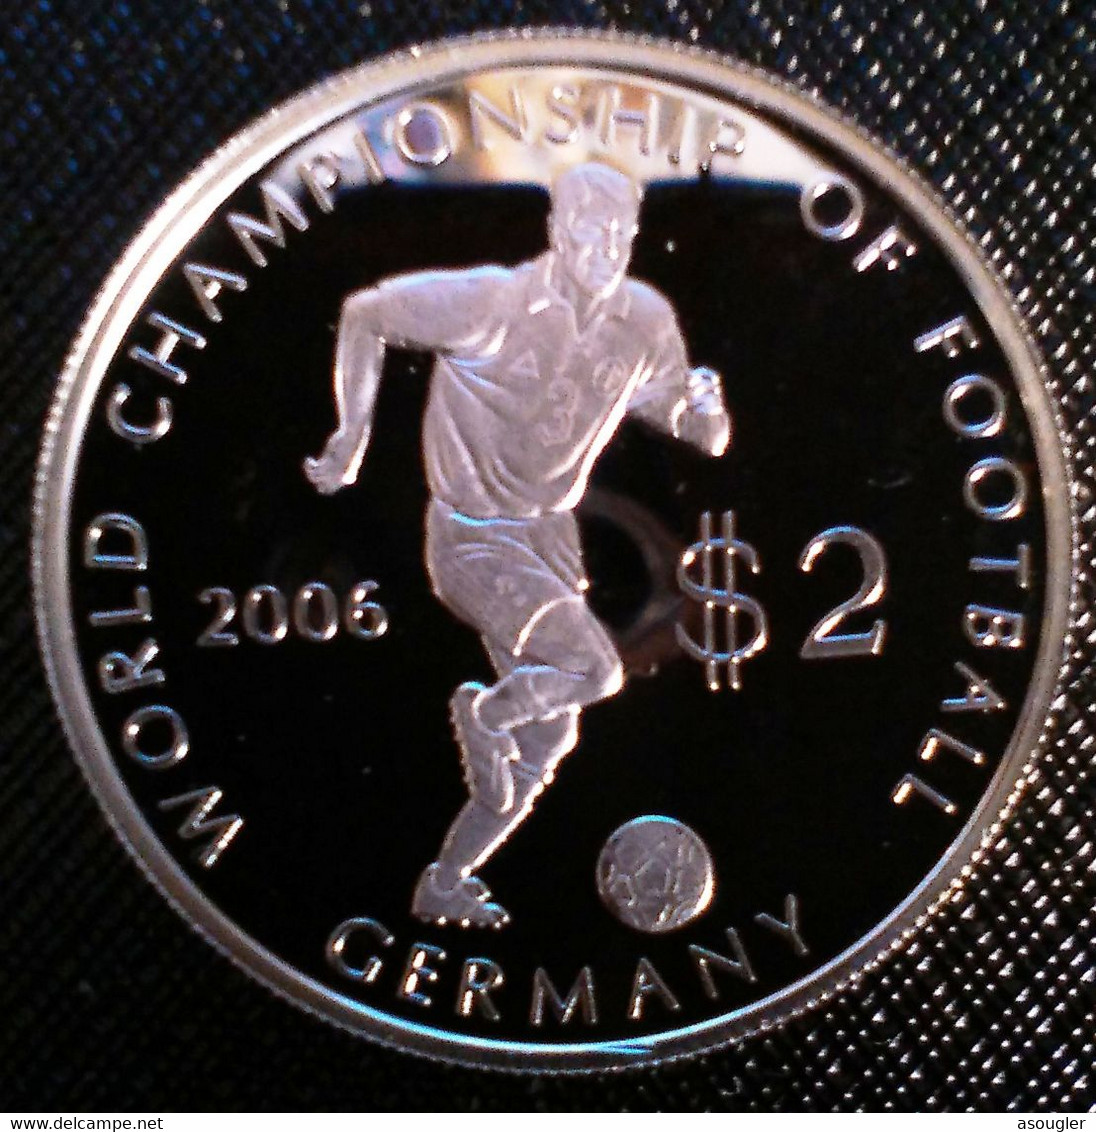 Cook Islands 2 DOLLARS 2003 SILVER PROOF "word Championship Football Germany 2006"free Shipping Via Registered Air Mail" - Cook Islands